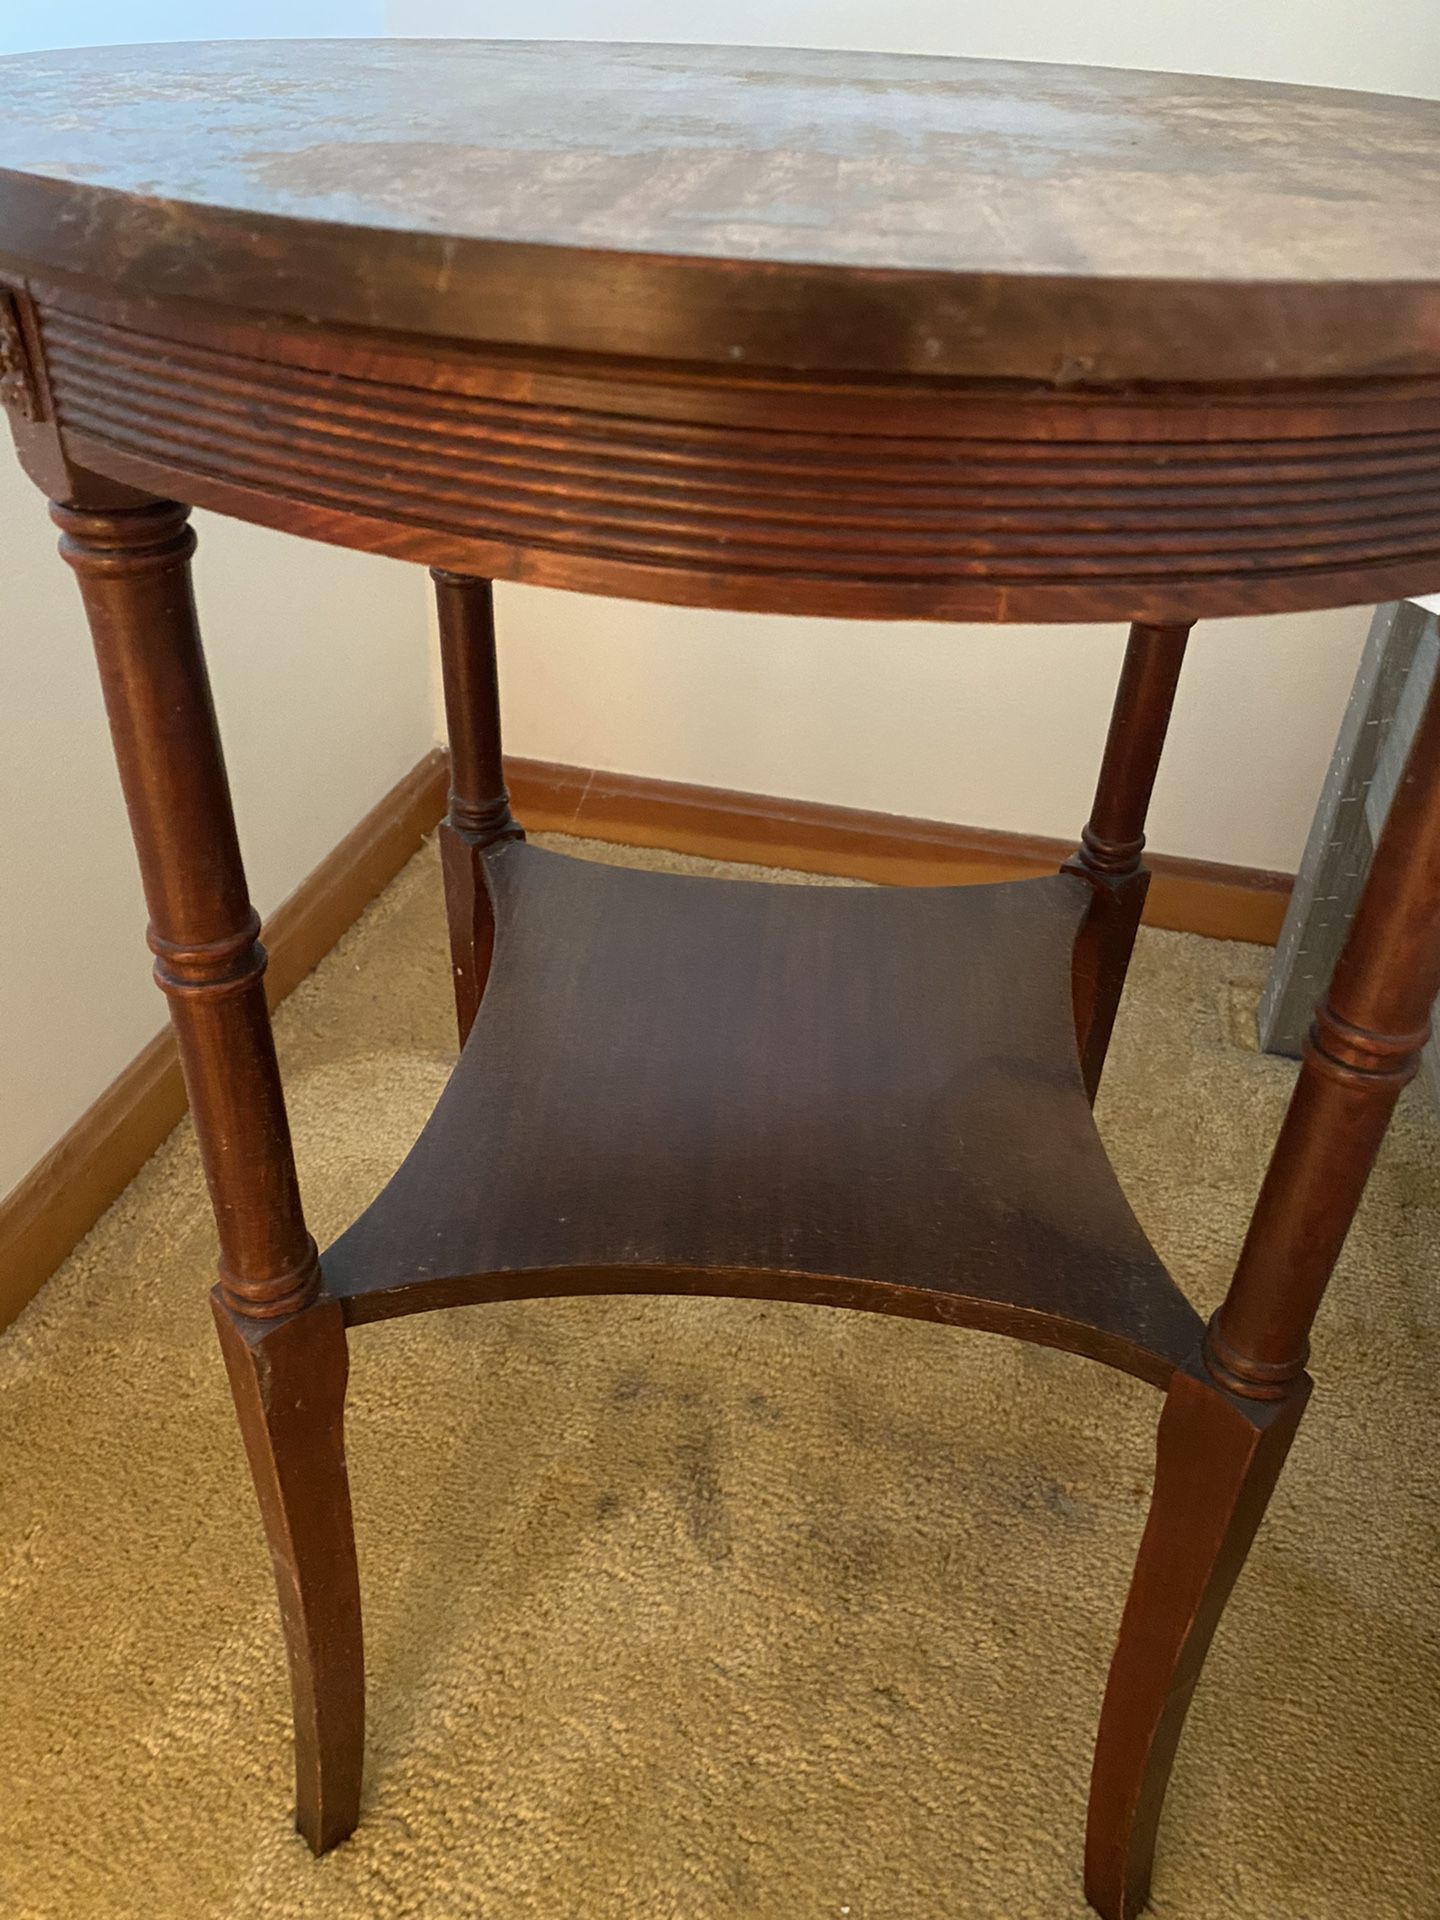 FREE End tables 